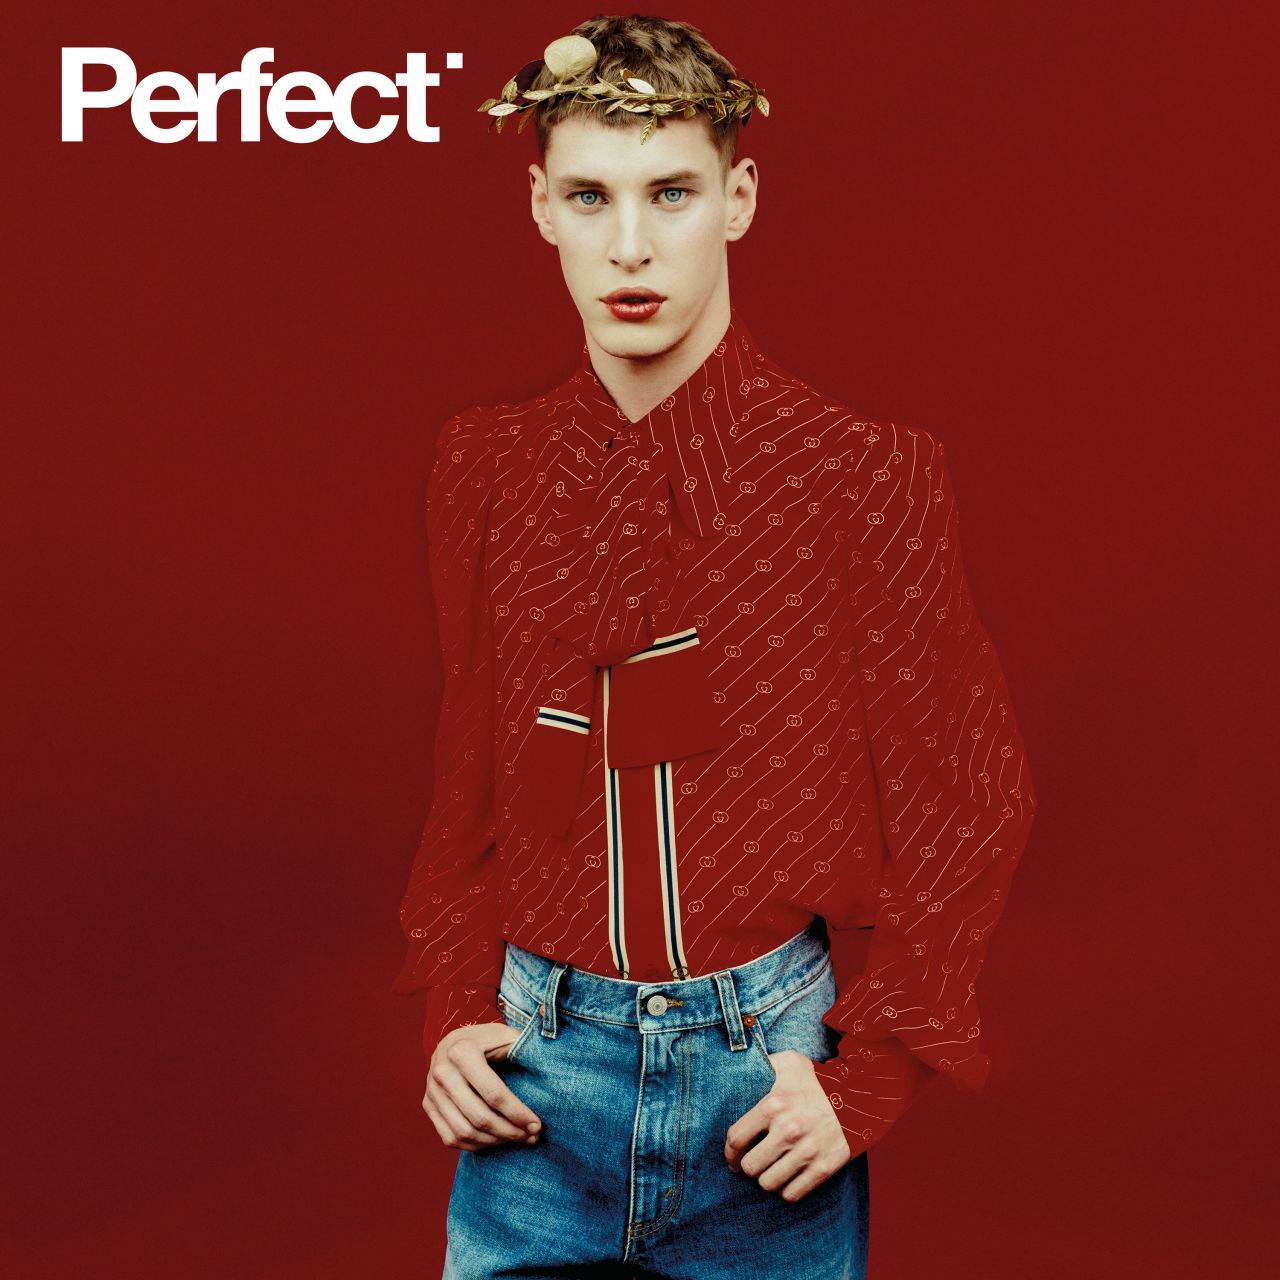 Ryan Zaman on the cover of Perfect magazine.